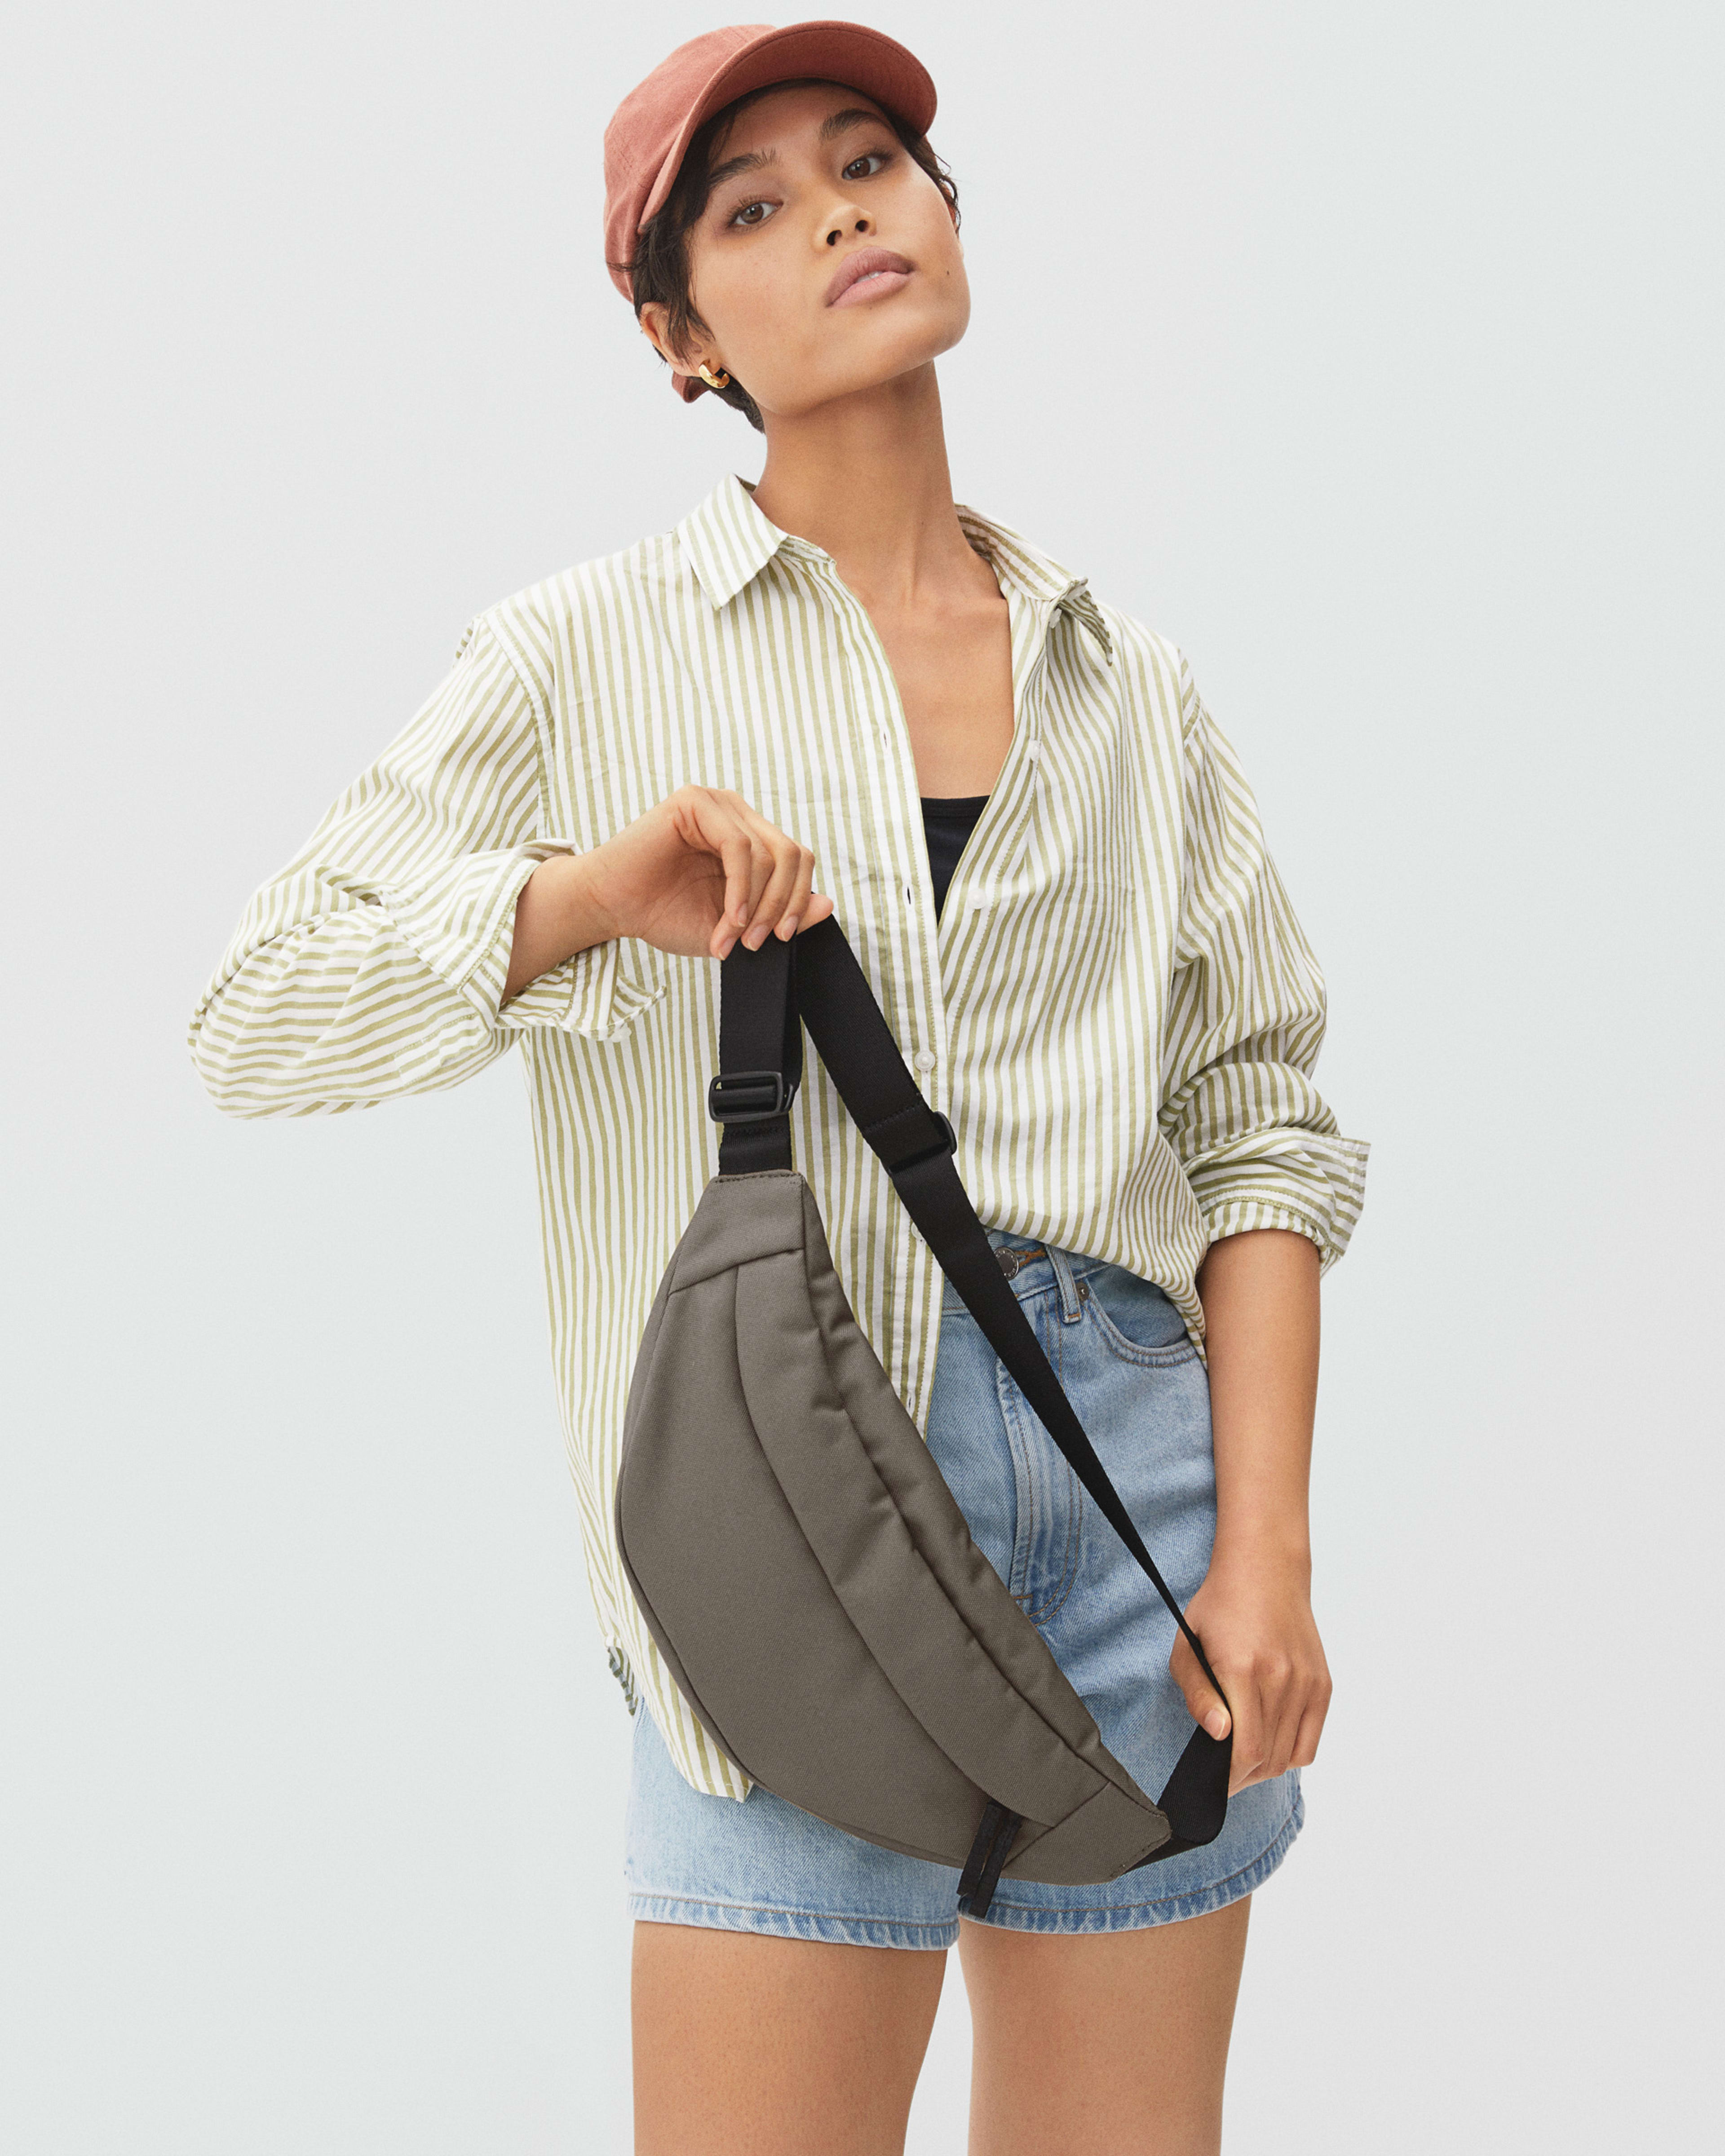 The Renew Transit Fanny Pack Warm Charcoal – Everlane